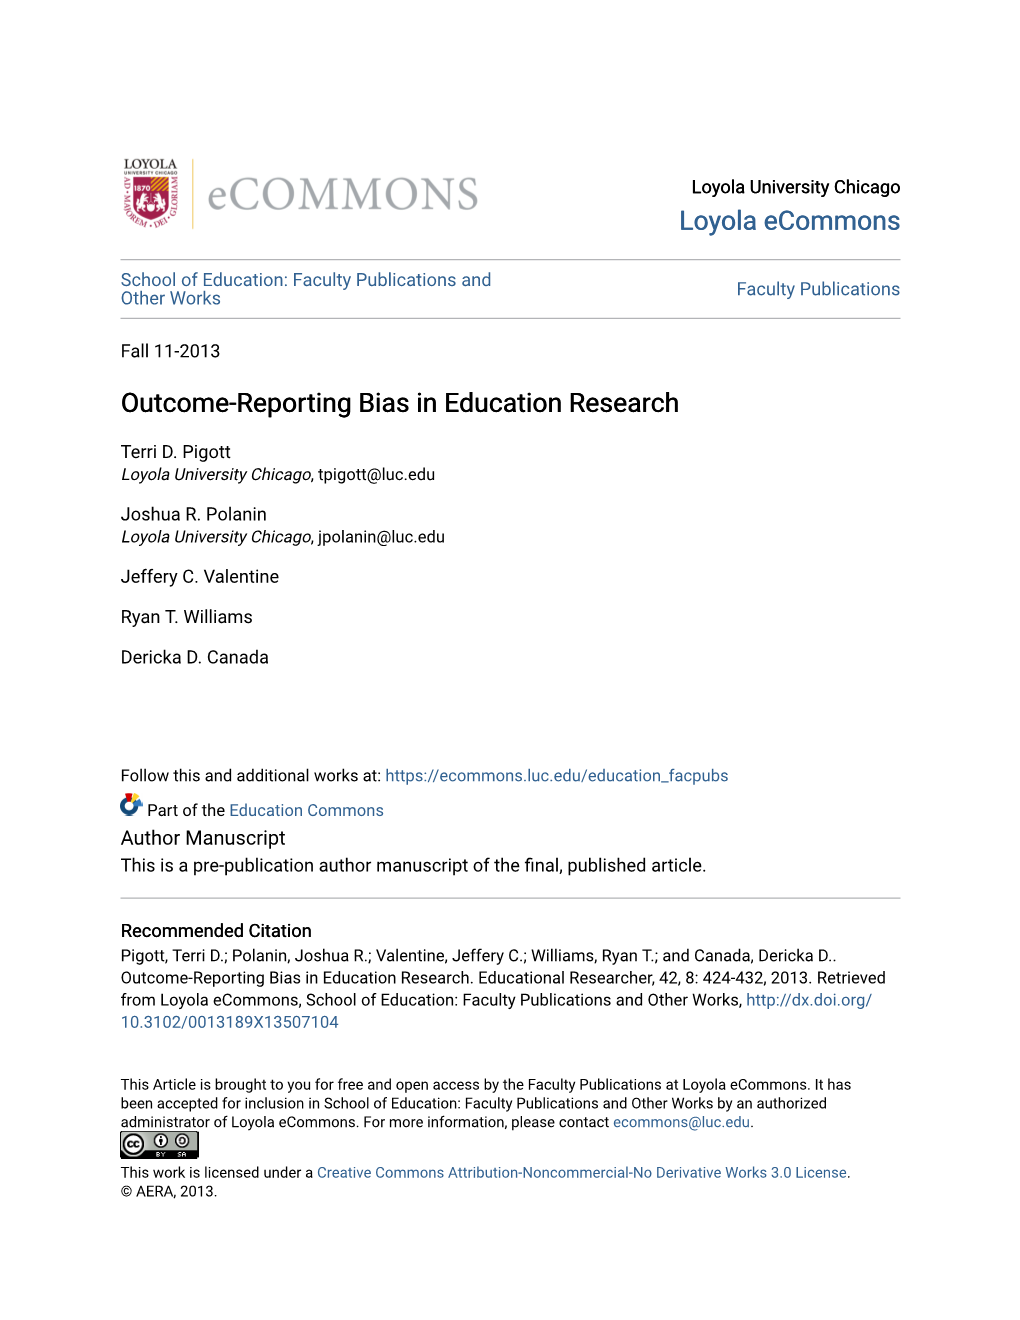 Outcome-Reporting Bias in Education Research